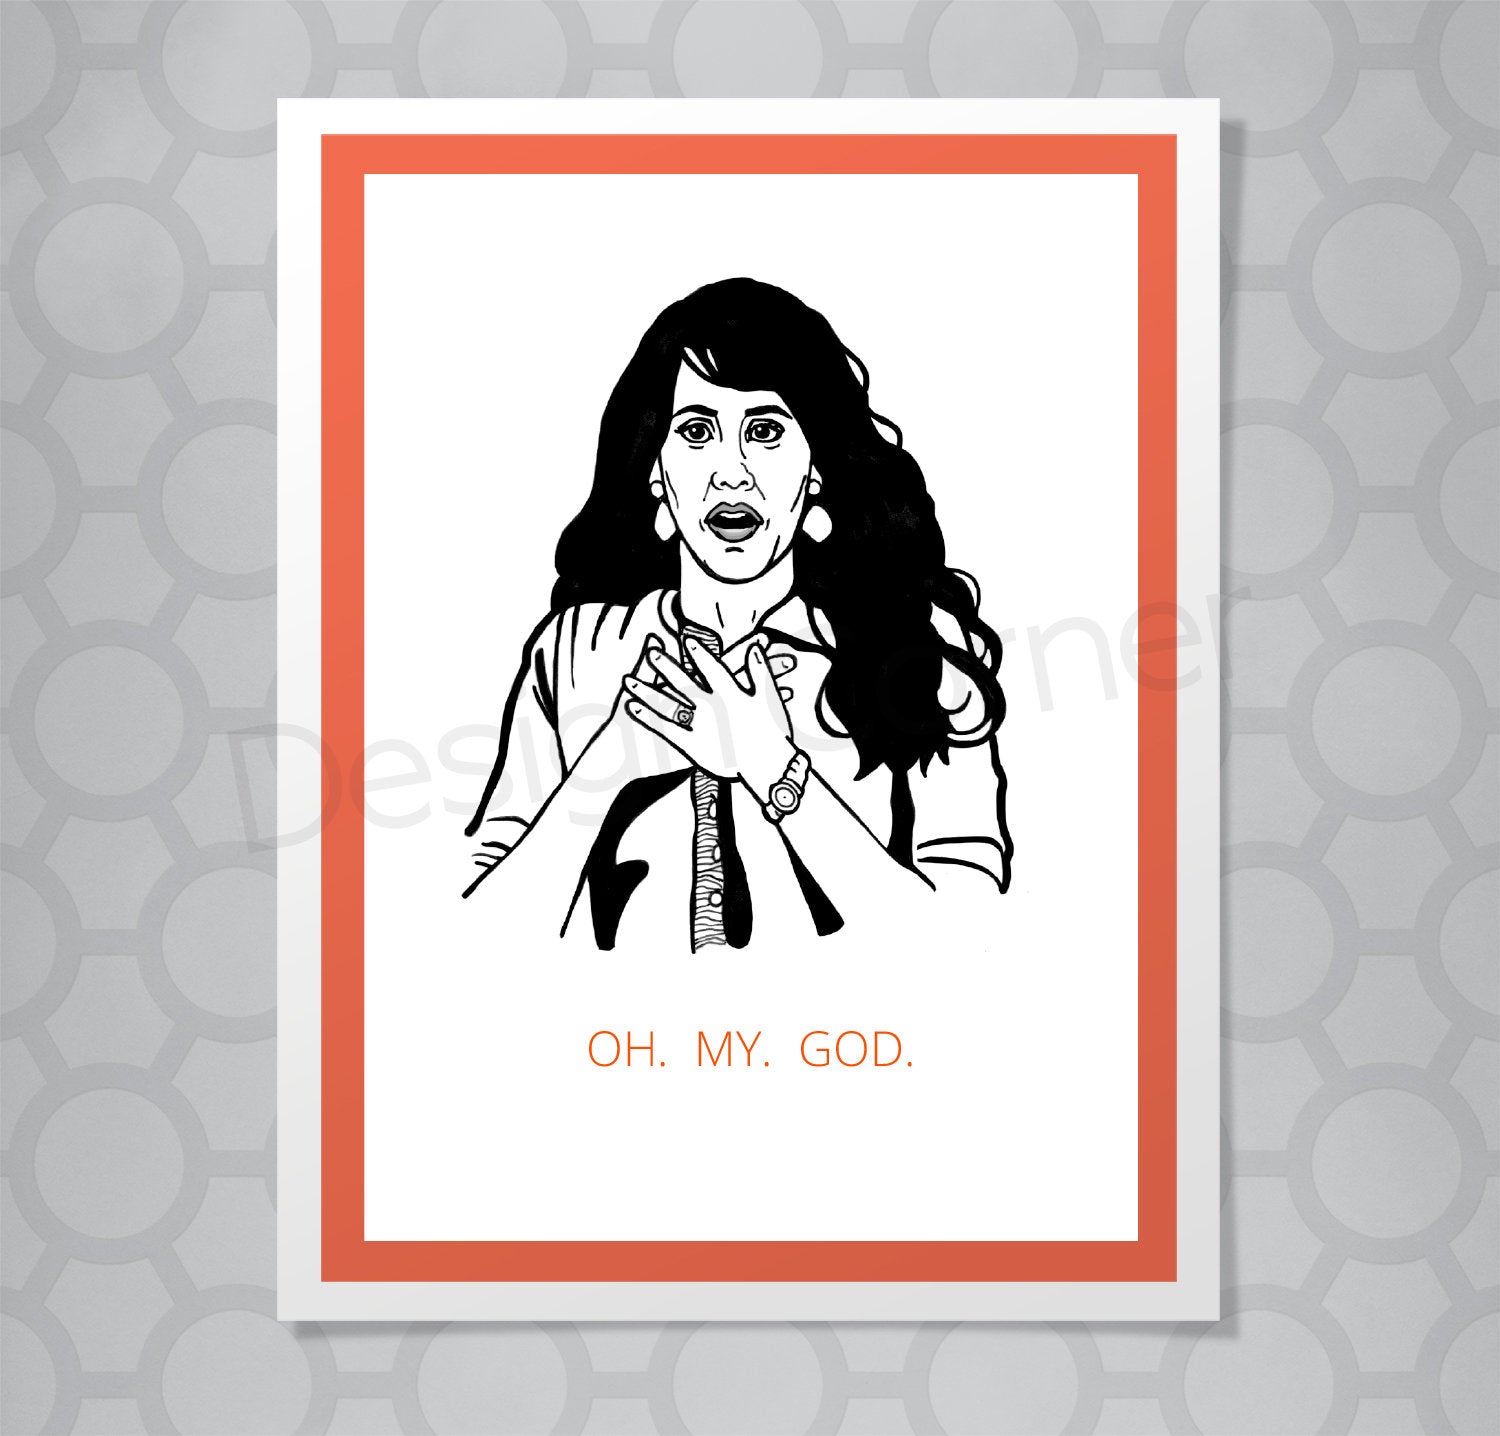 Greeting card with illustration of Friends show janice. Caption says "Oh. My. God."